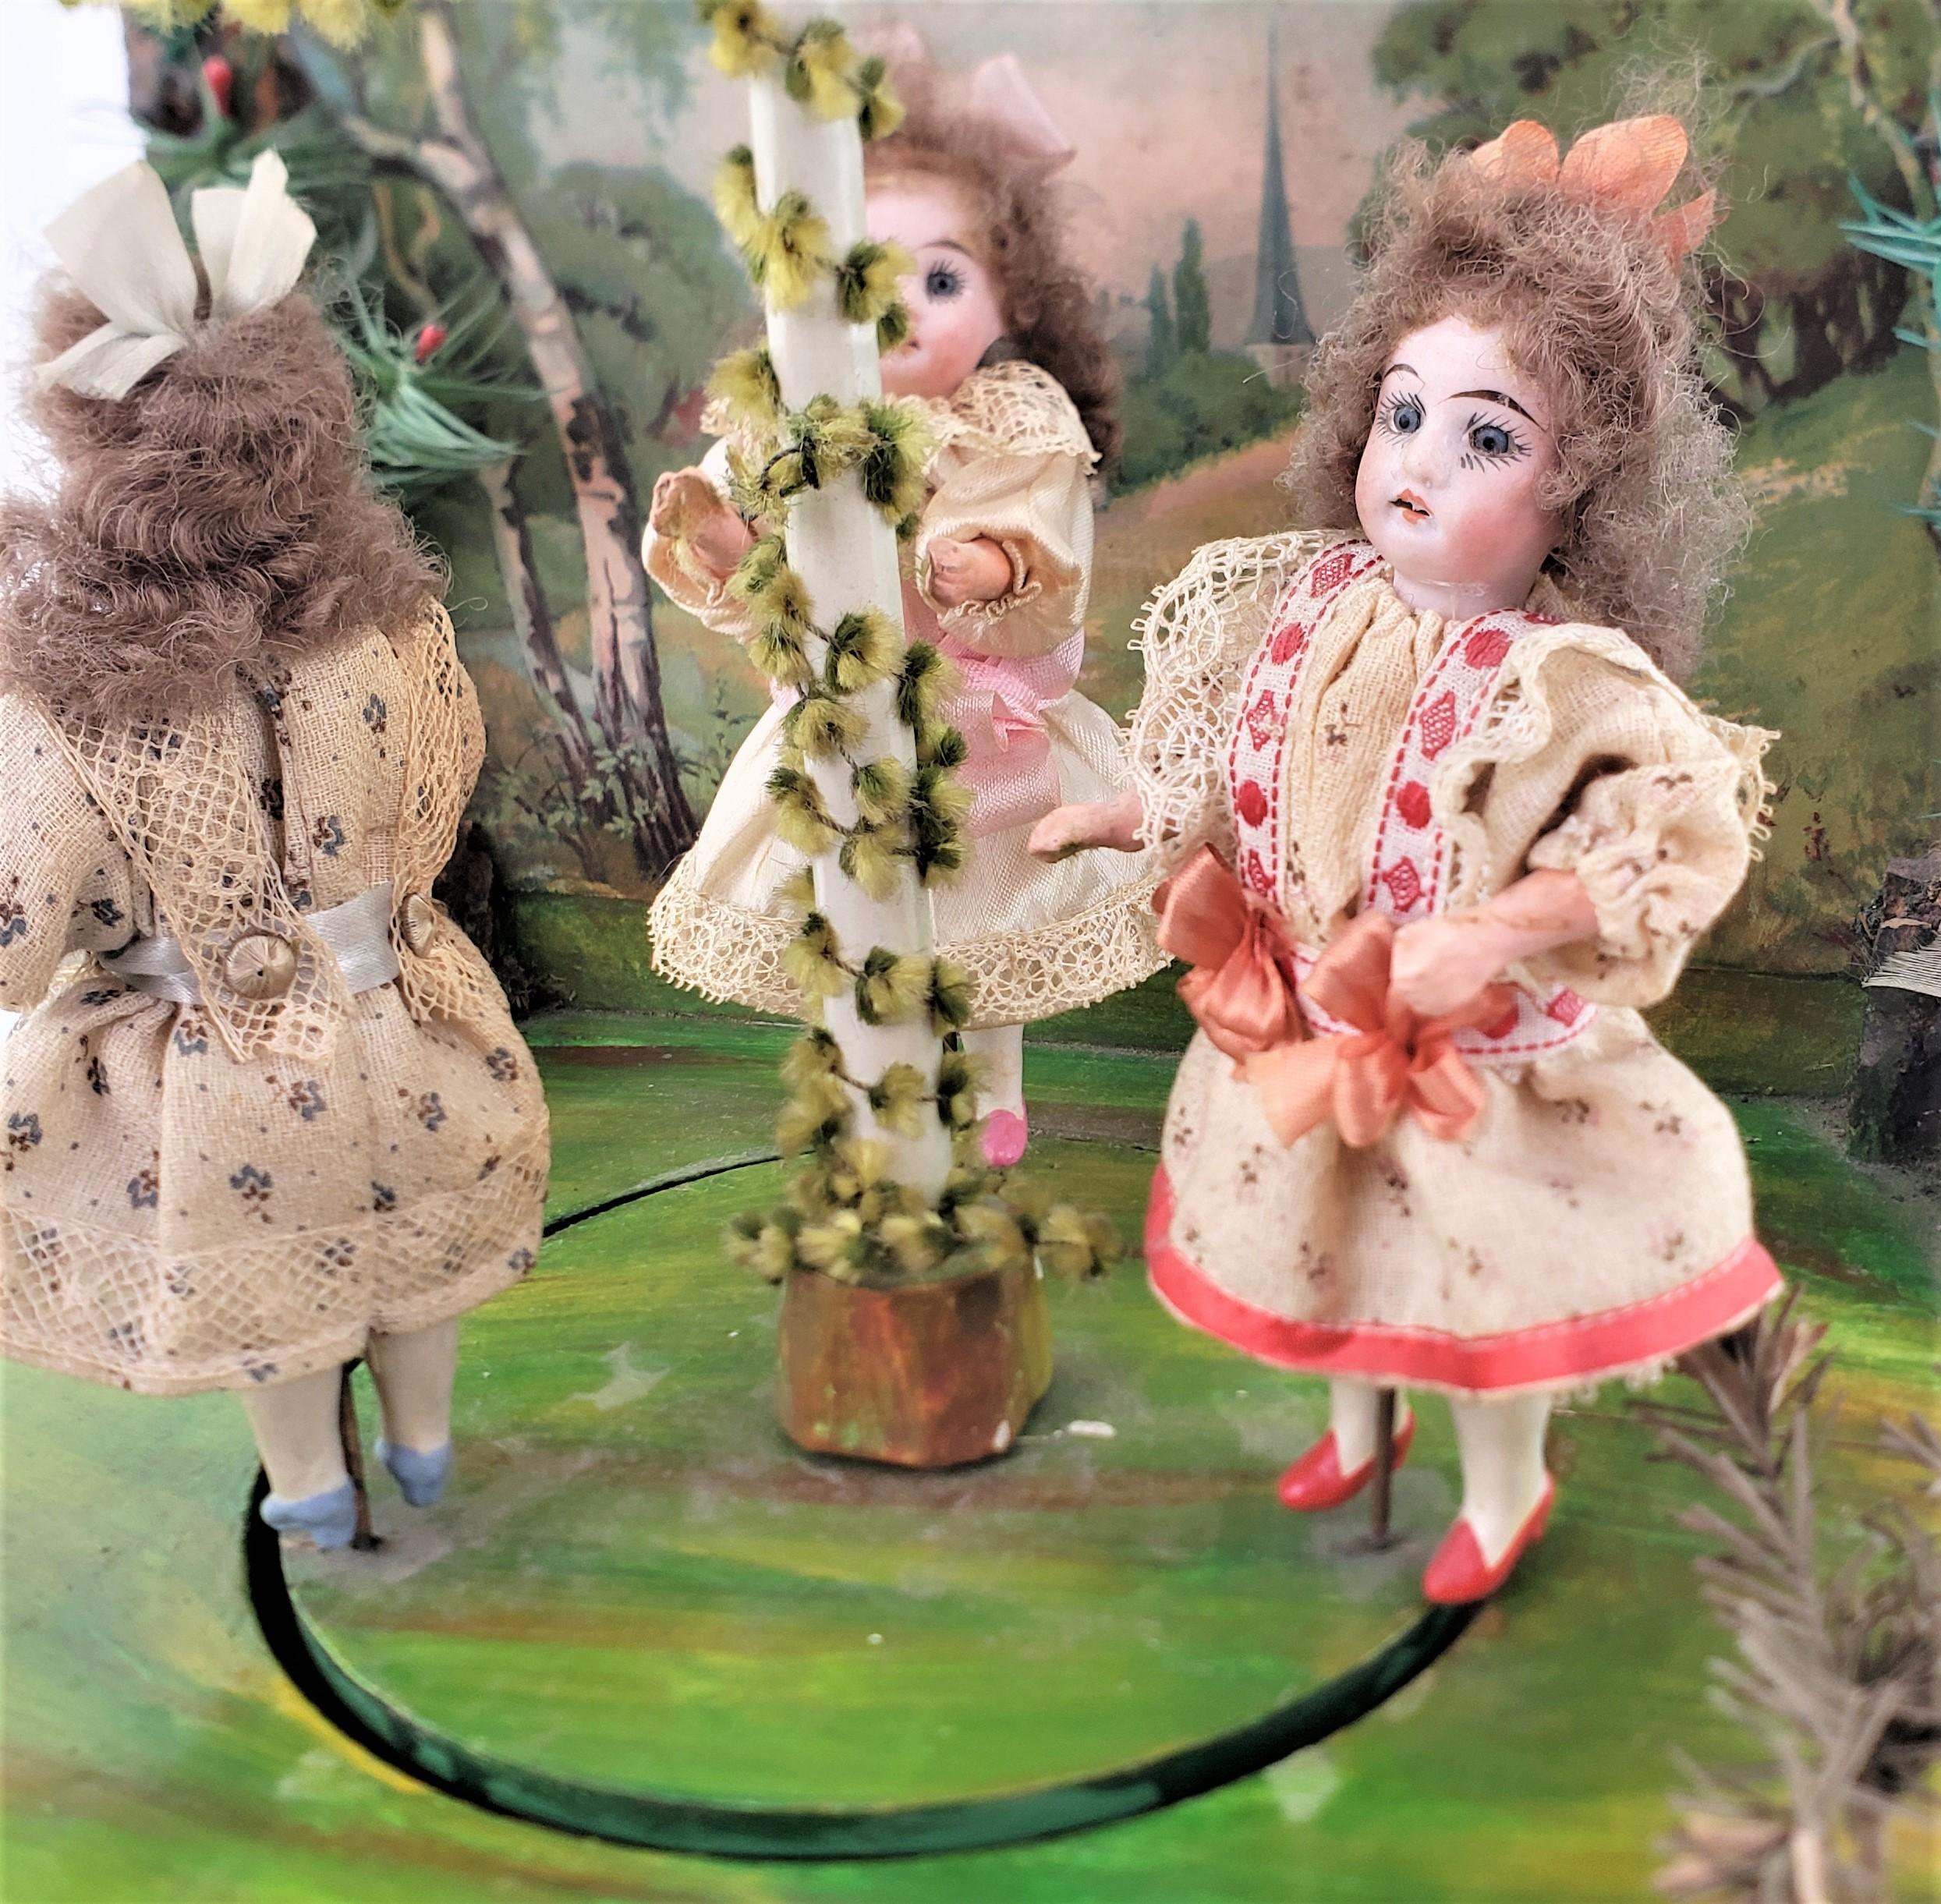 Antique German Toy Automaton Music Box with Girls Dancing Around the Maypole 1